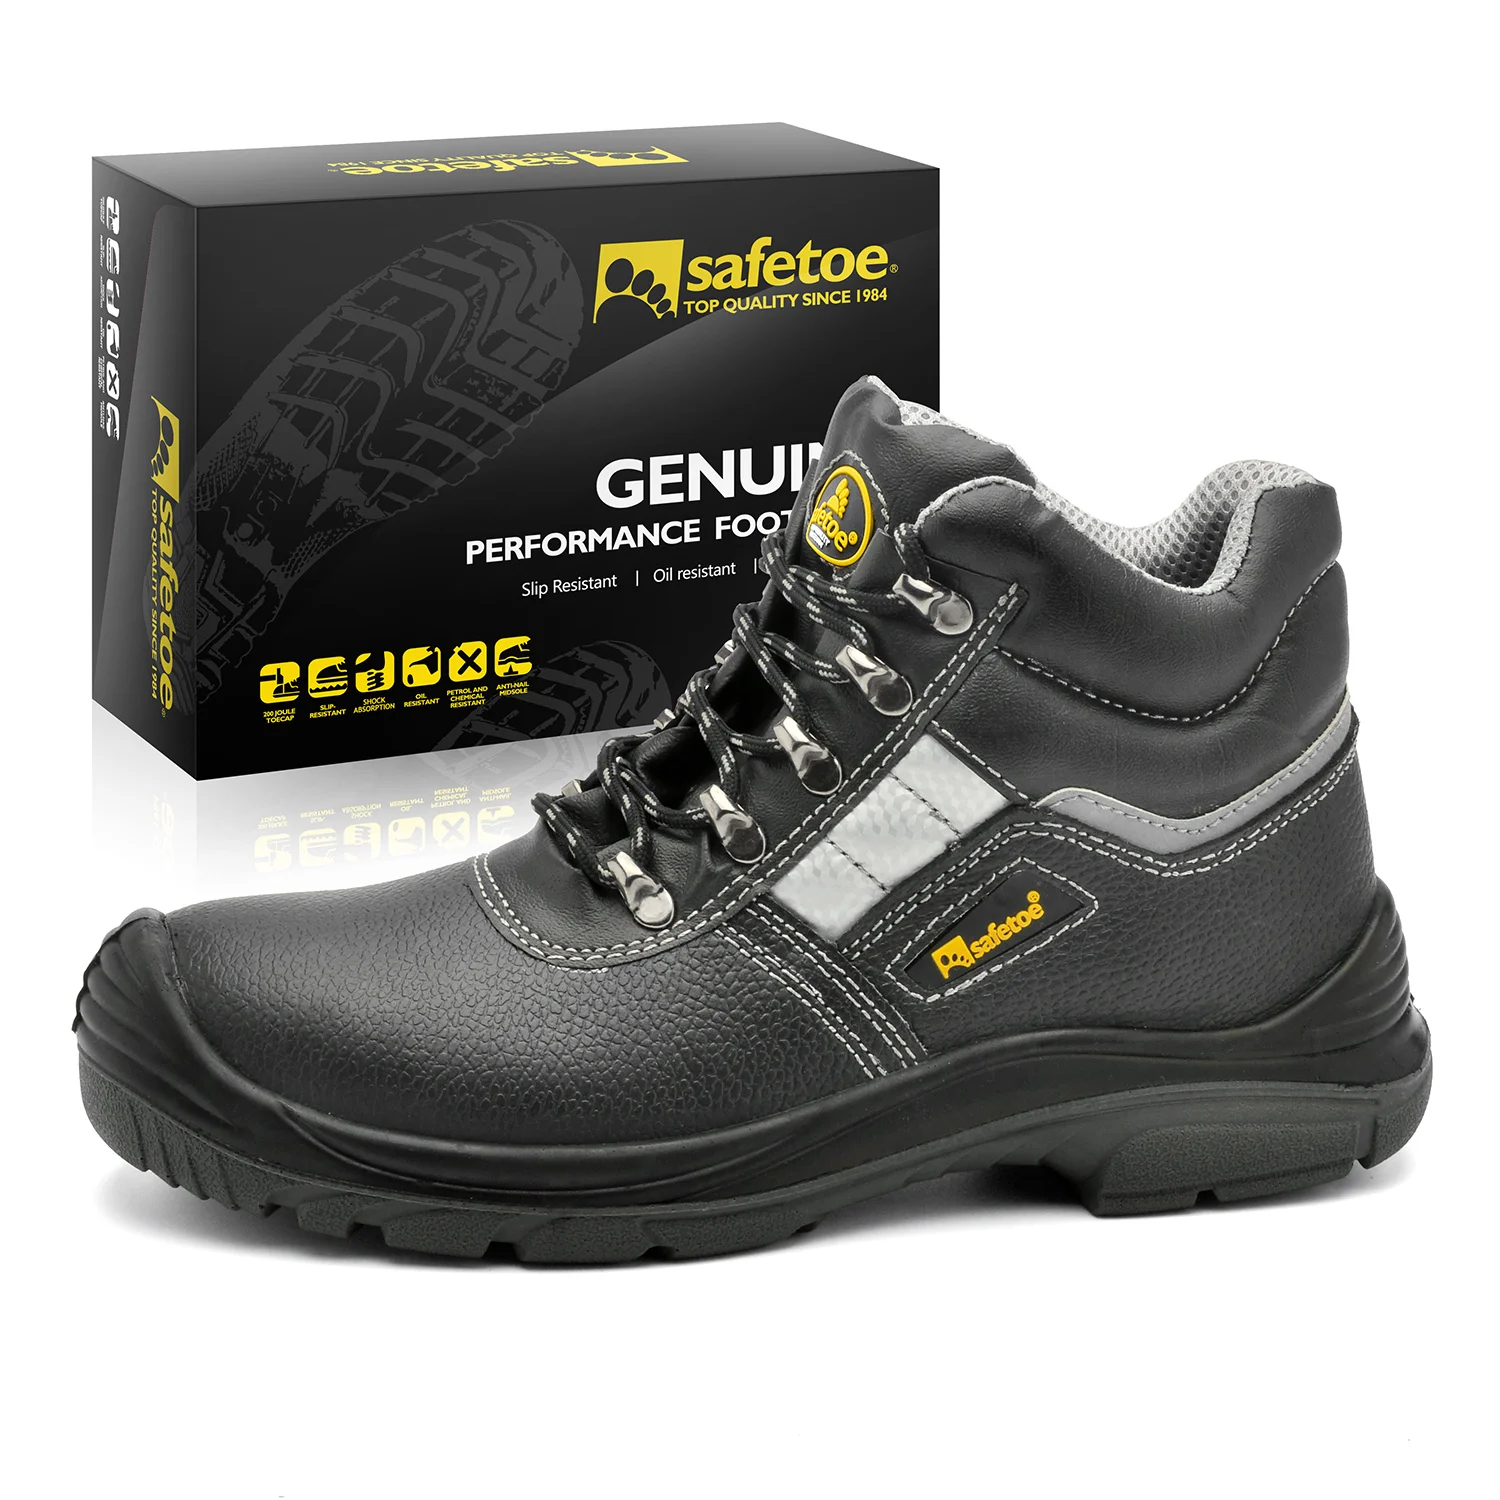 
Safetoe S3 CE Steel Toe Cap Safety Shoes for Men & Lady Workers, Cow Leather Indestructible China Safey Work Boots for Industry  (62136252166)